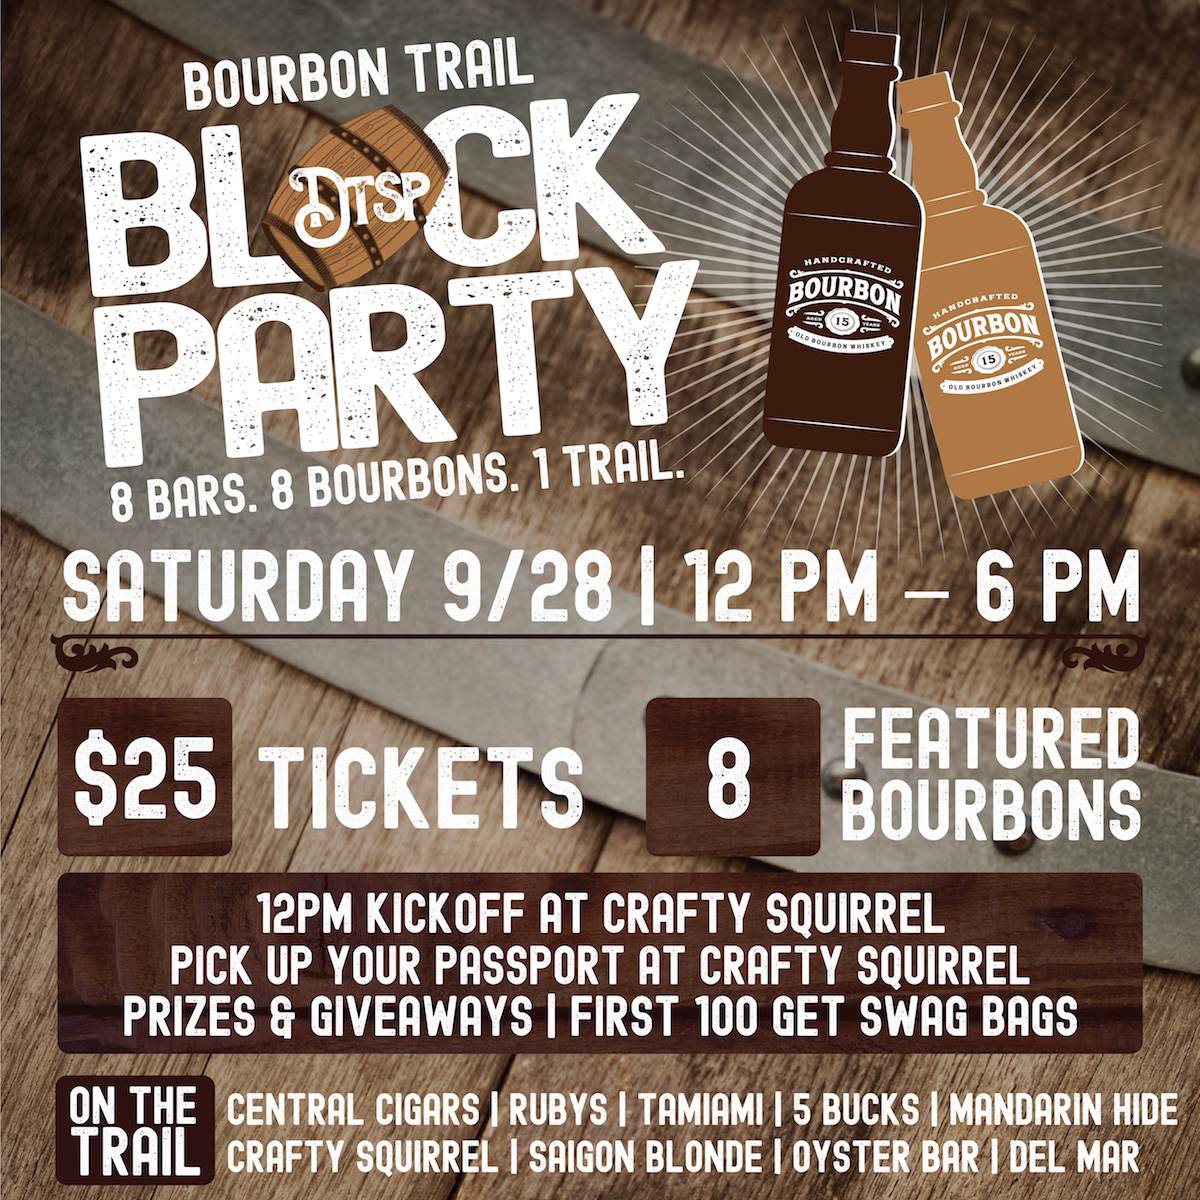 Calling All Bourbon Lovers for a Downtown St. Pete Bourbon Trail Block Party